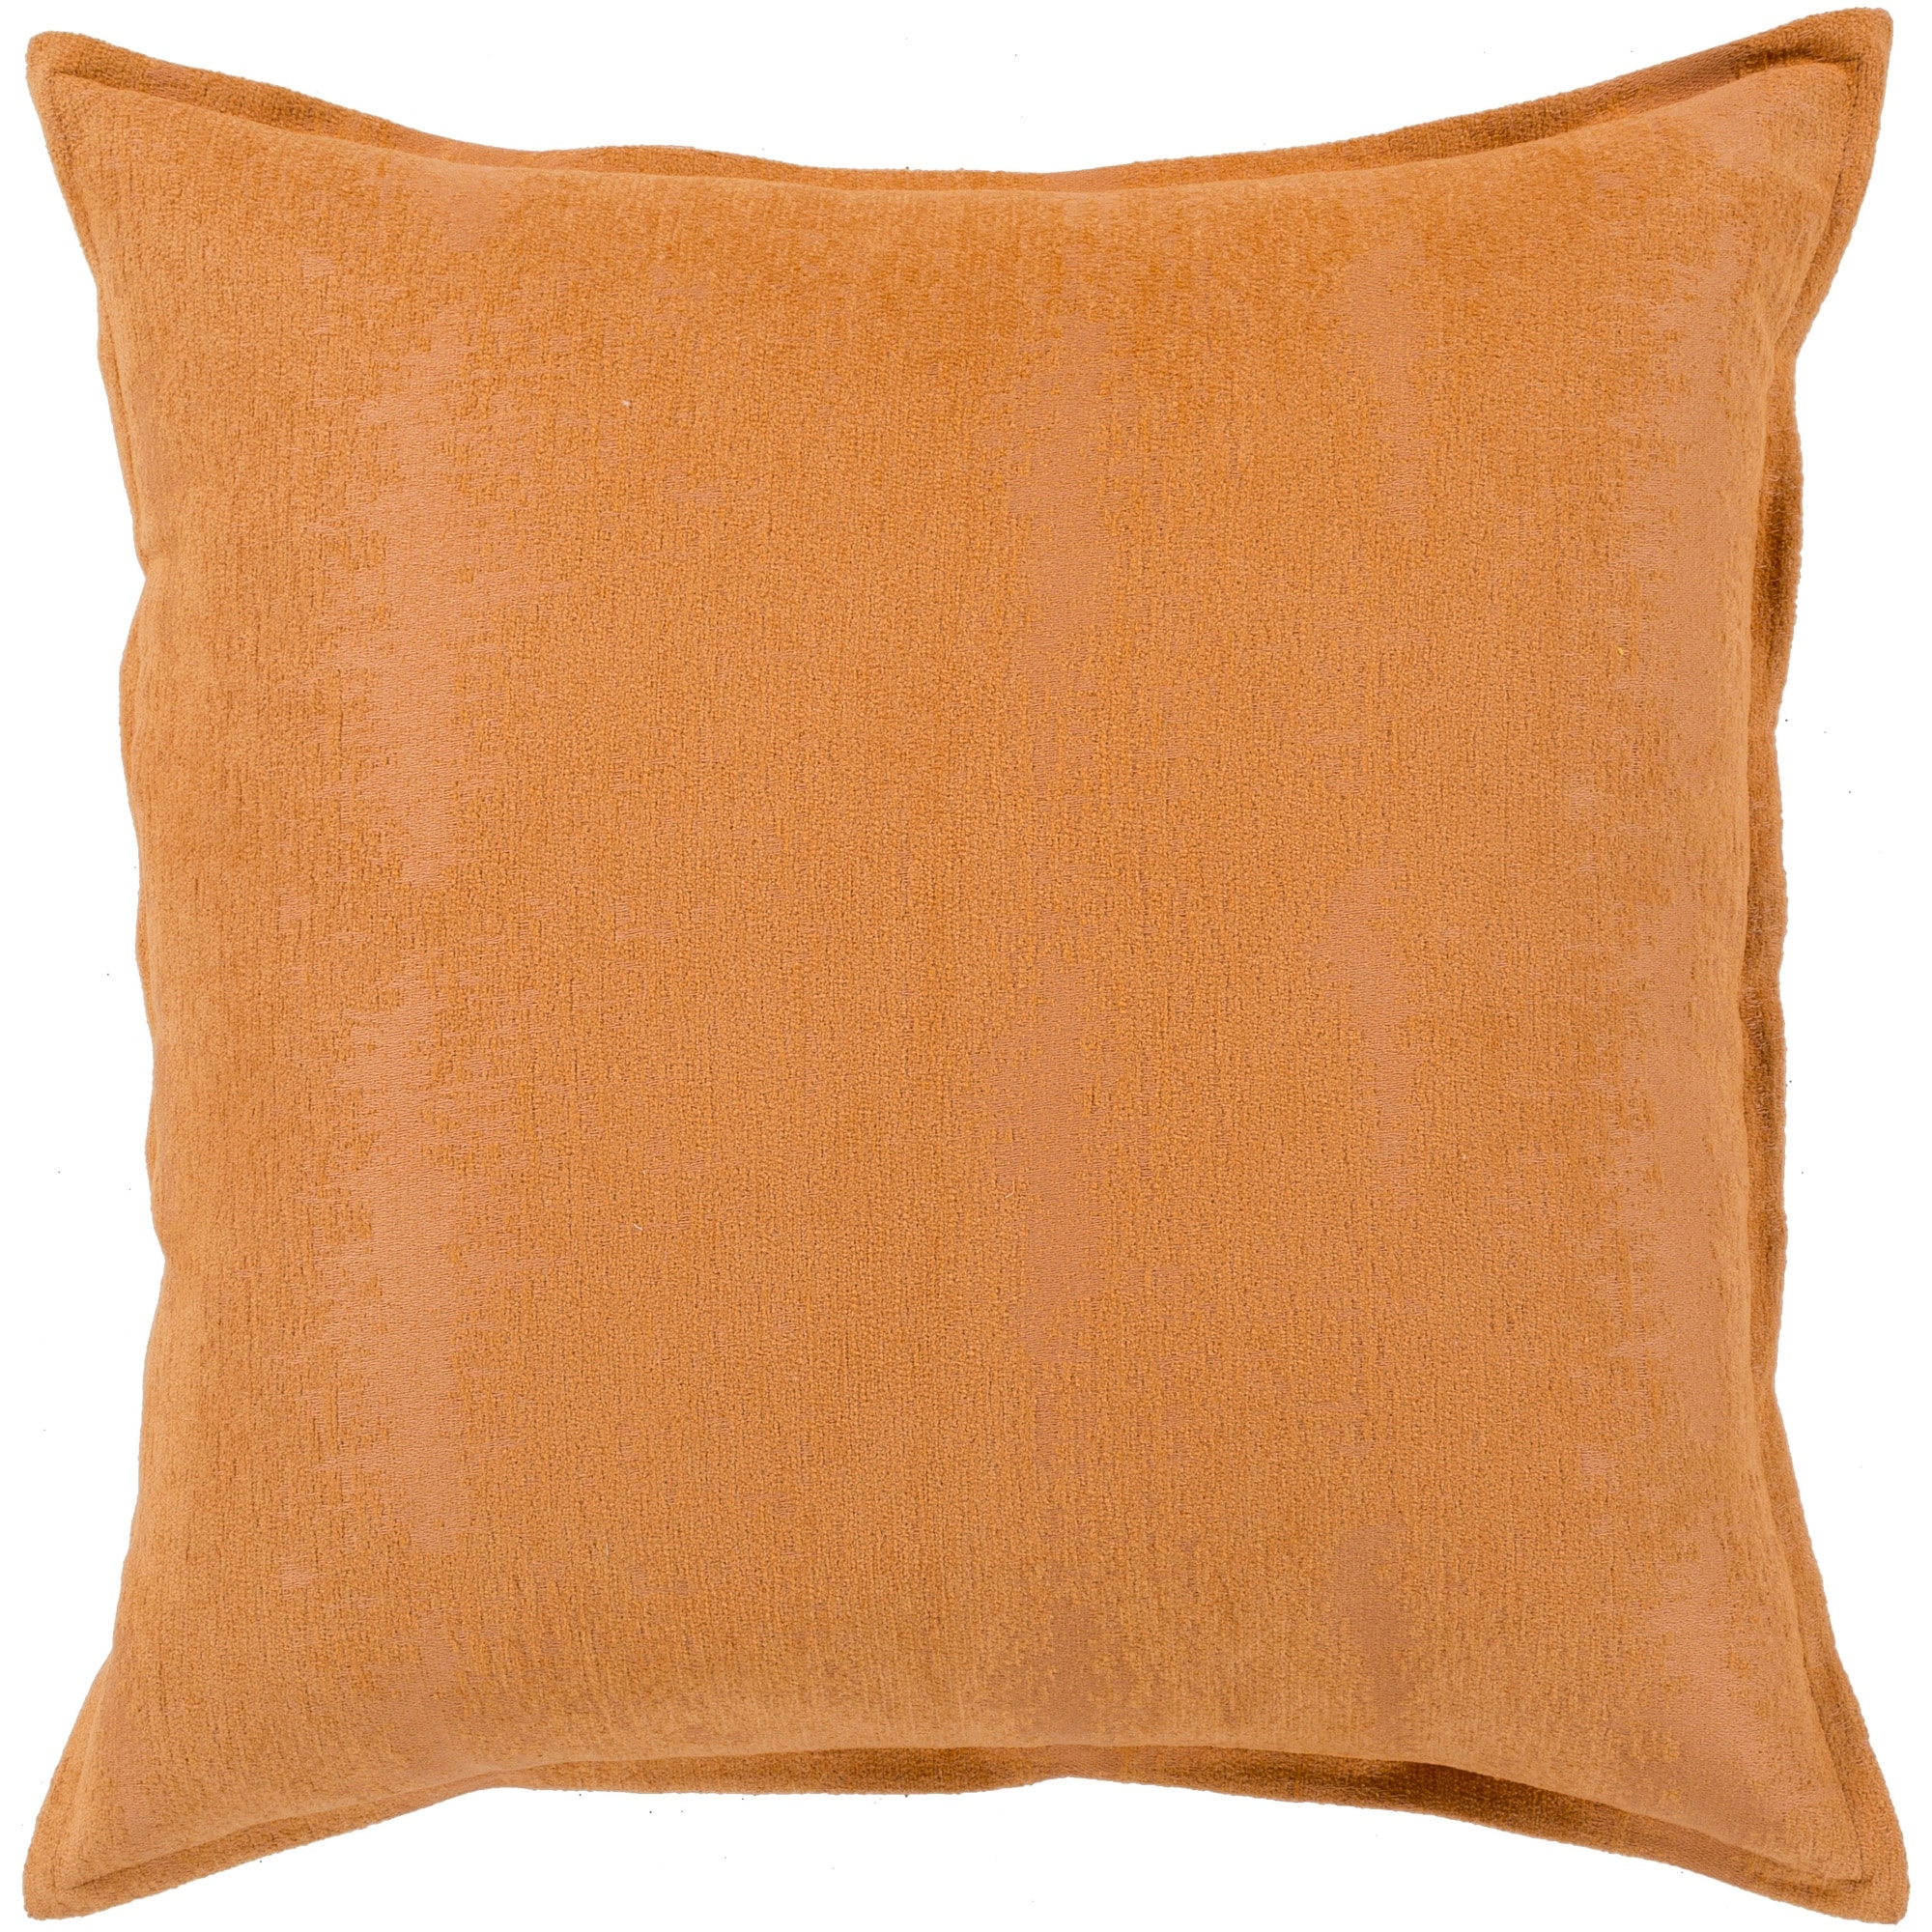 22 x 22 throw pillow covers